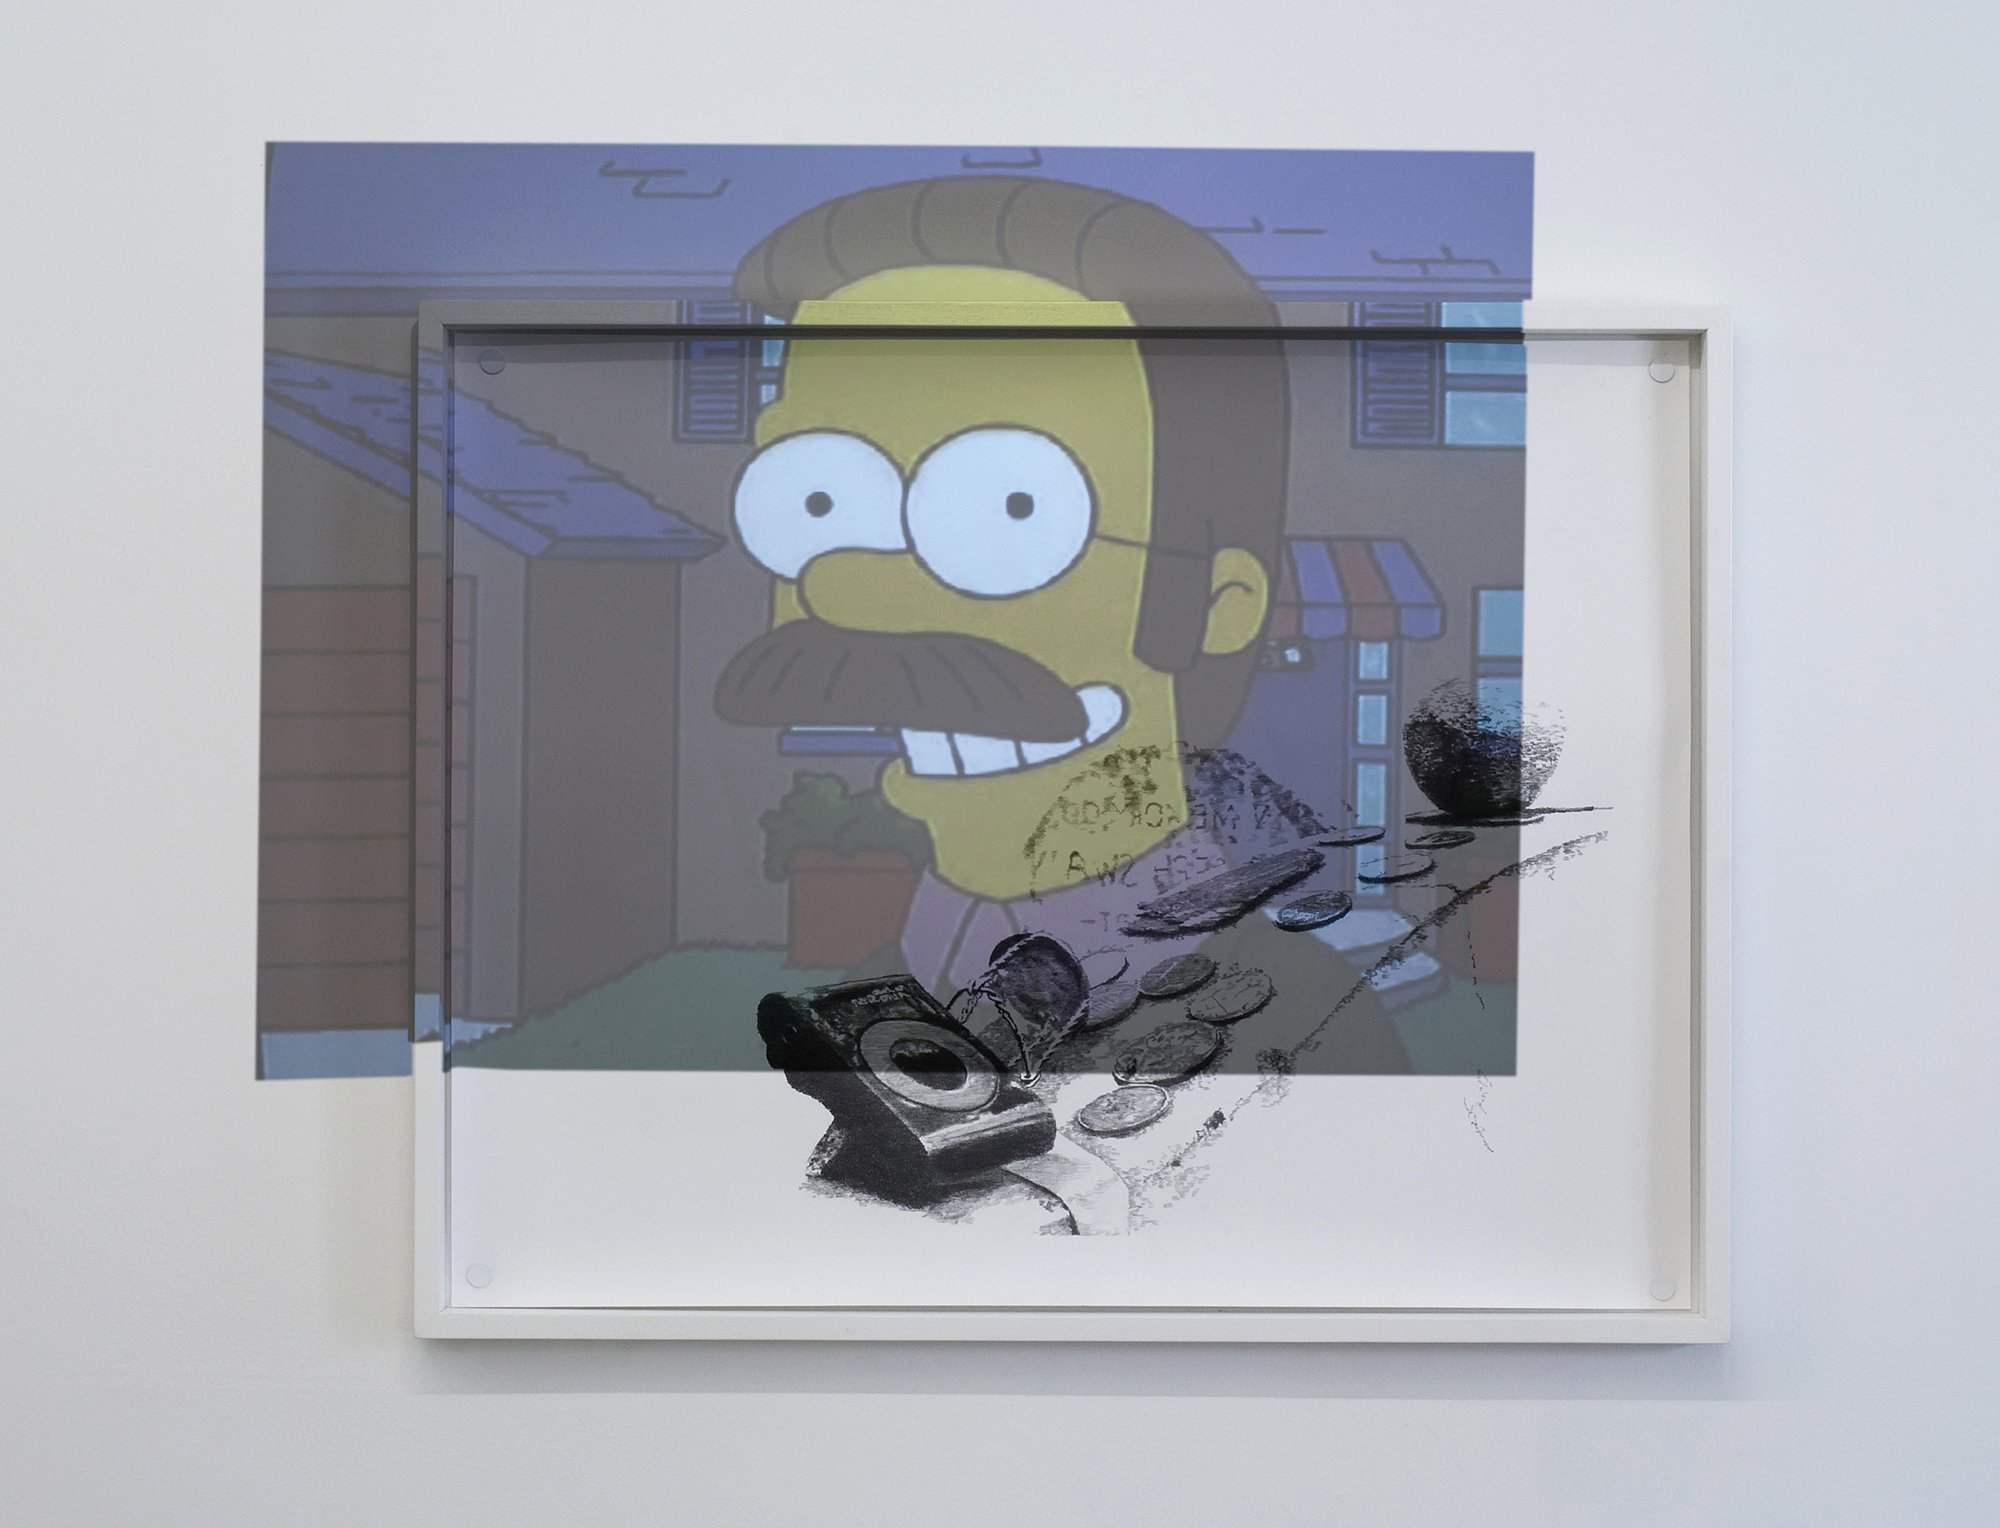 Mark Aerial Waller, Offering Transmissions #3, graphite on paper, projection of recent episode of The Simpsons, 100 x 78 cm, 2011-2012. Installation view, Offering Transmissions, Rodeo, Istanbul, 2012